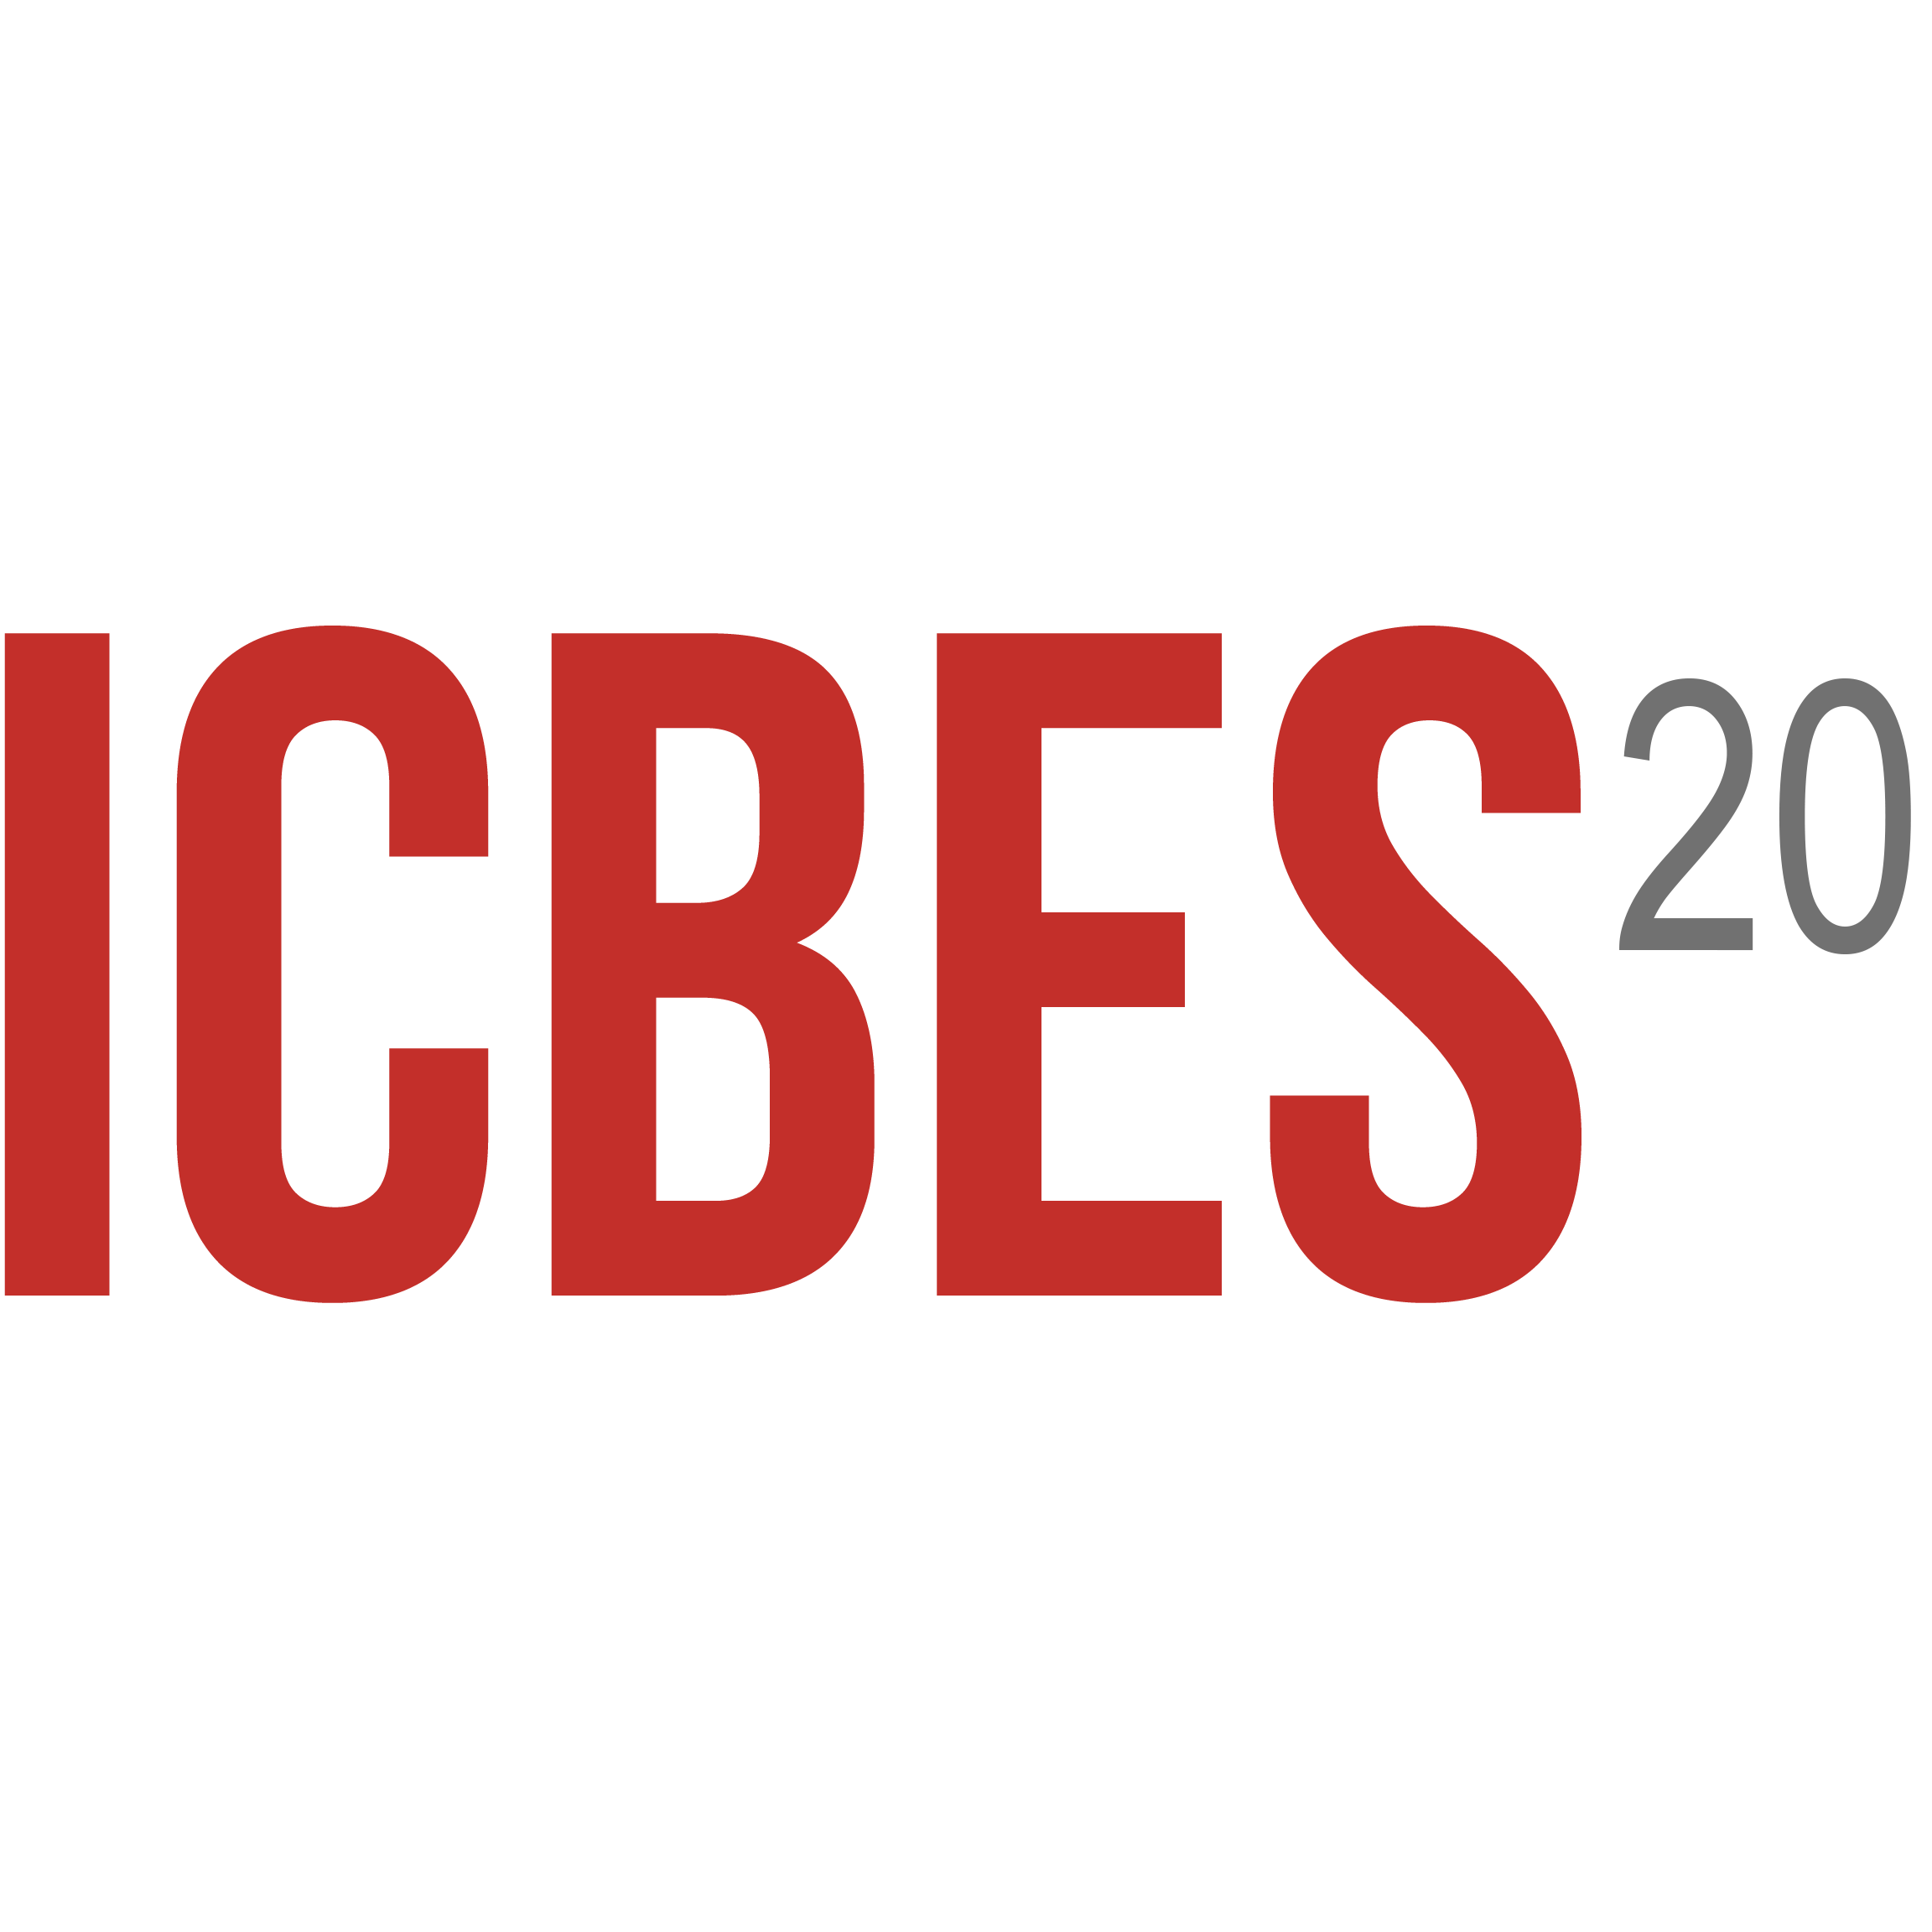 7th International Conference on Biomedical Engineering and Systems (ICBES’20)